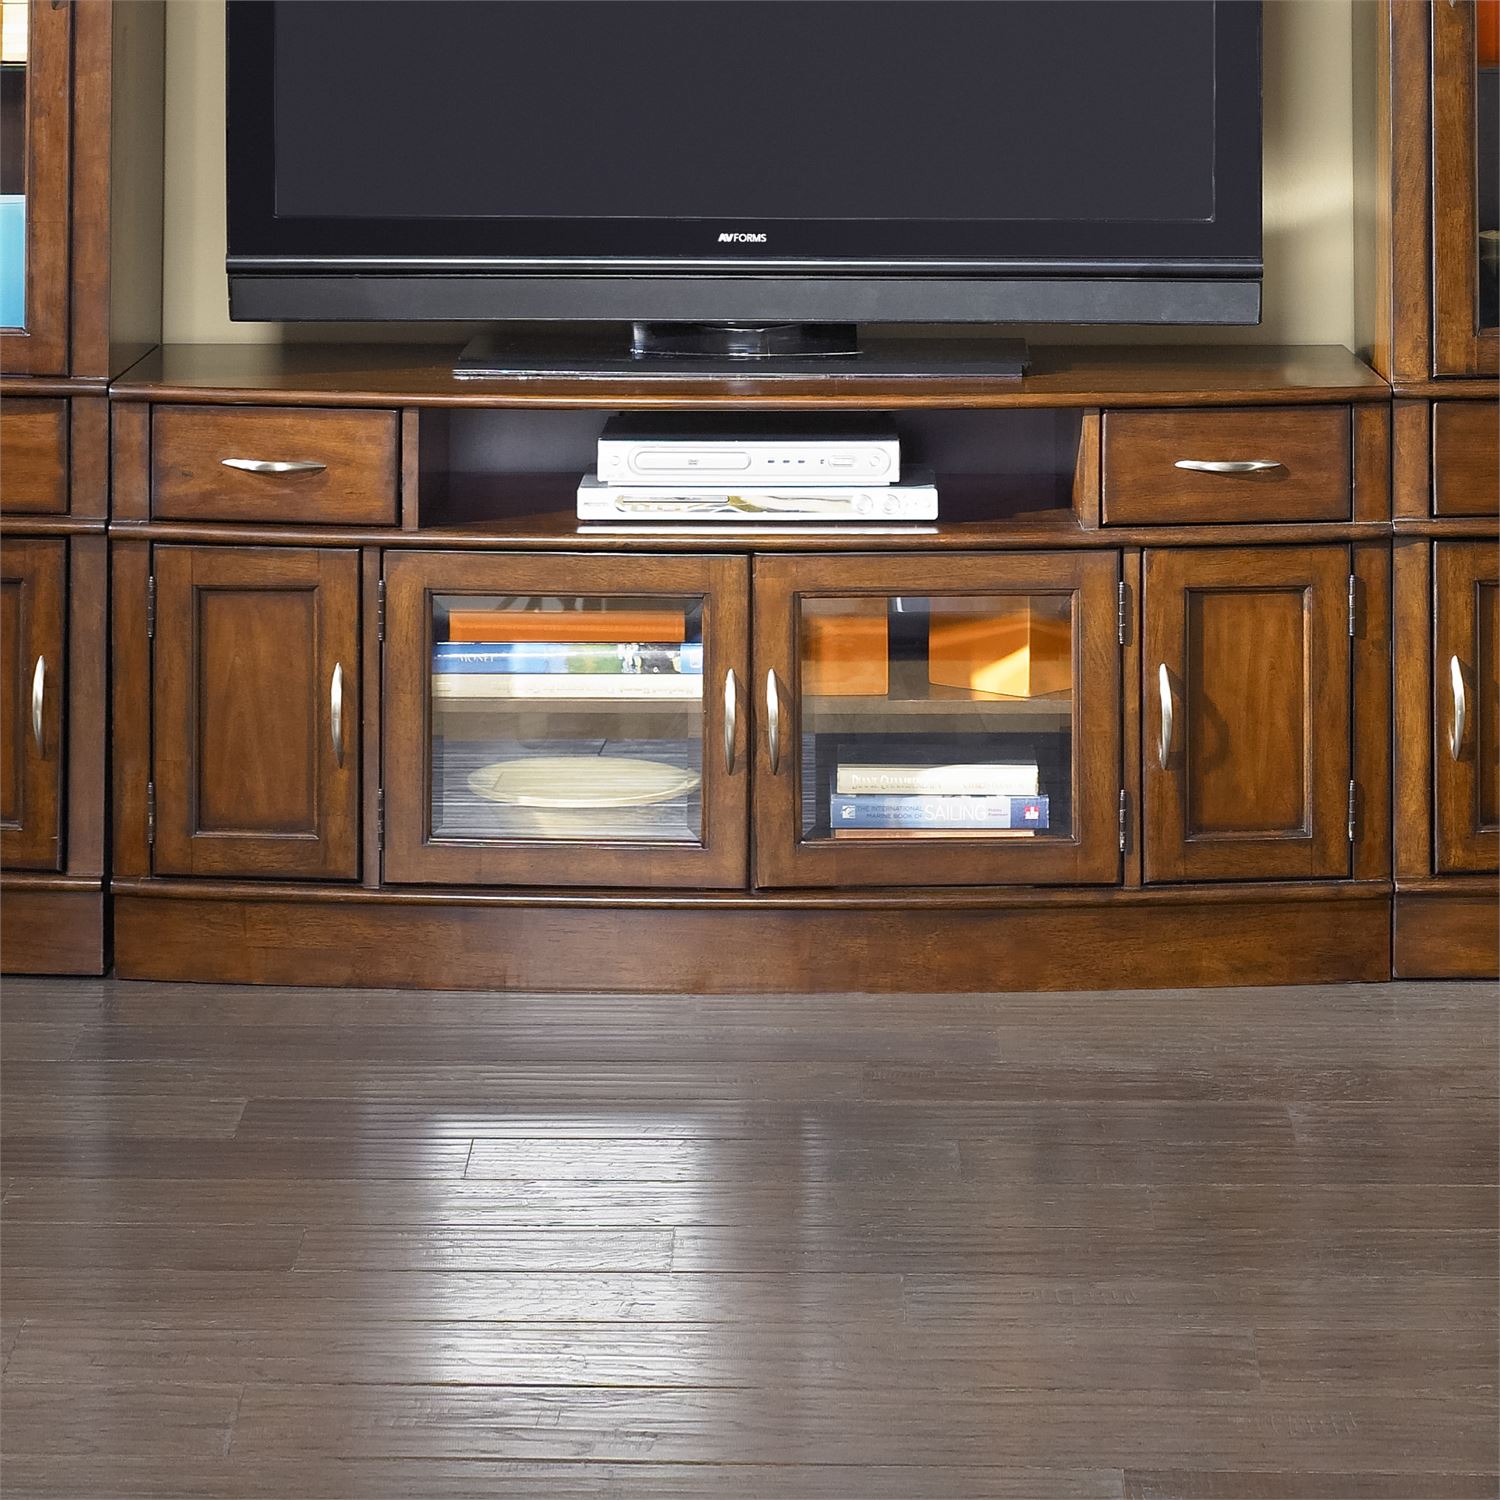 Hanover Entertainment TV Stand